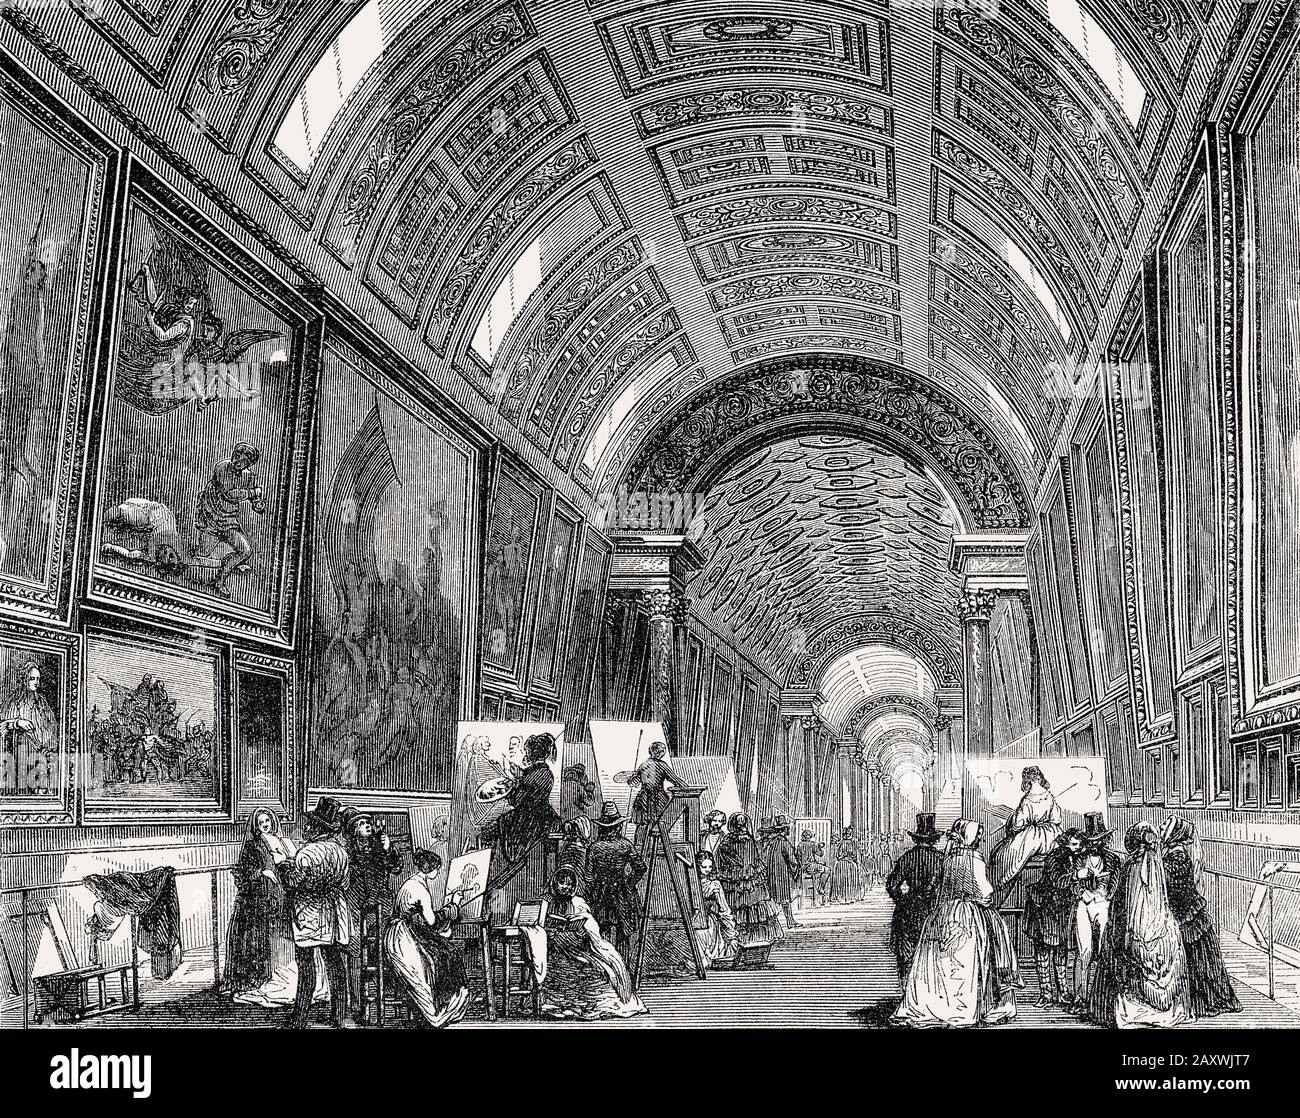 The Louvre Palace, French museum, Paris, France, 19th century Stock Photo